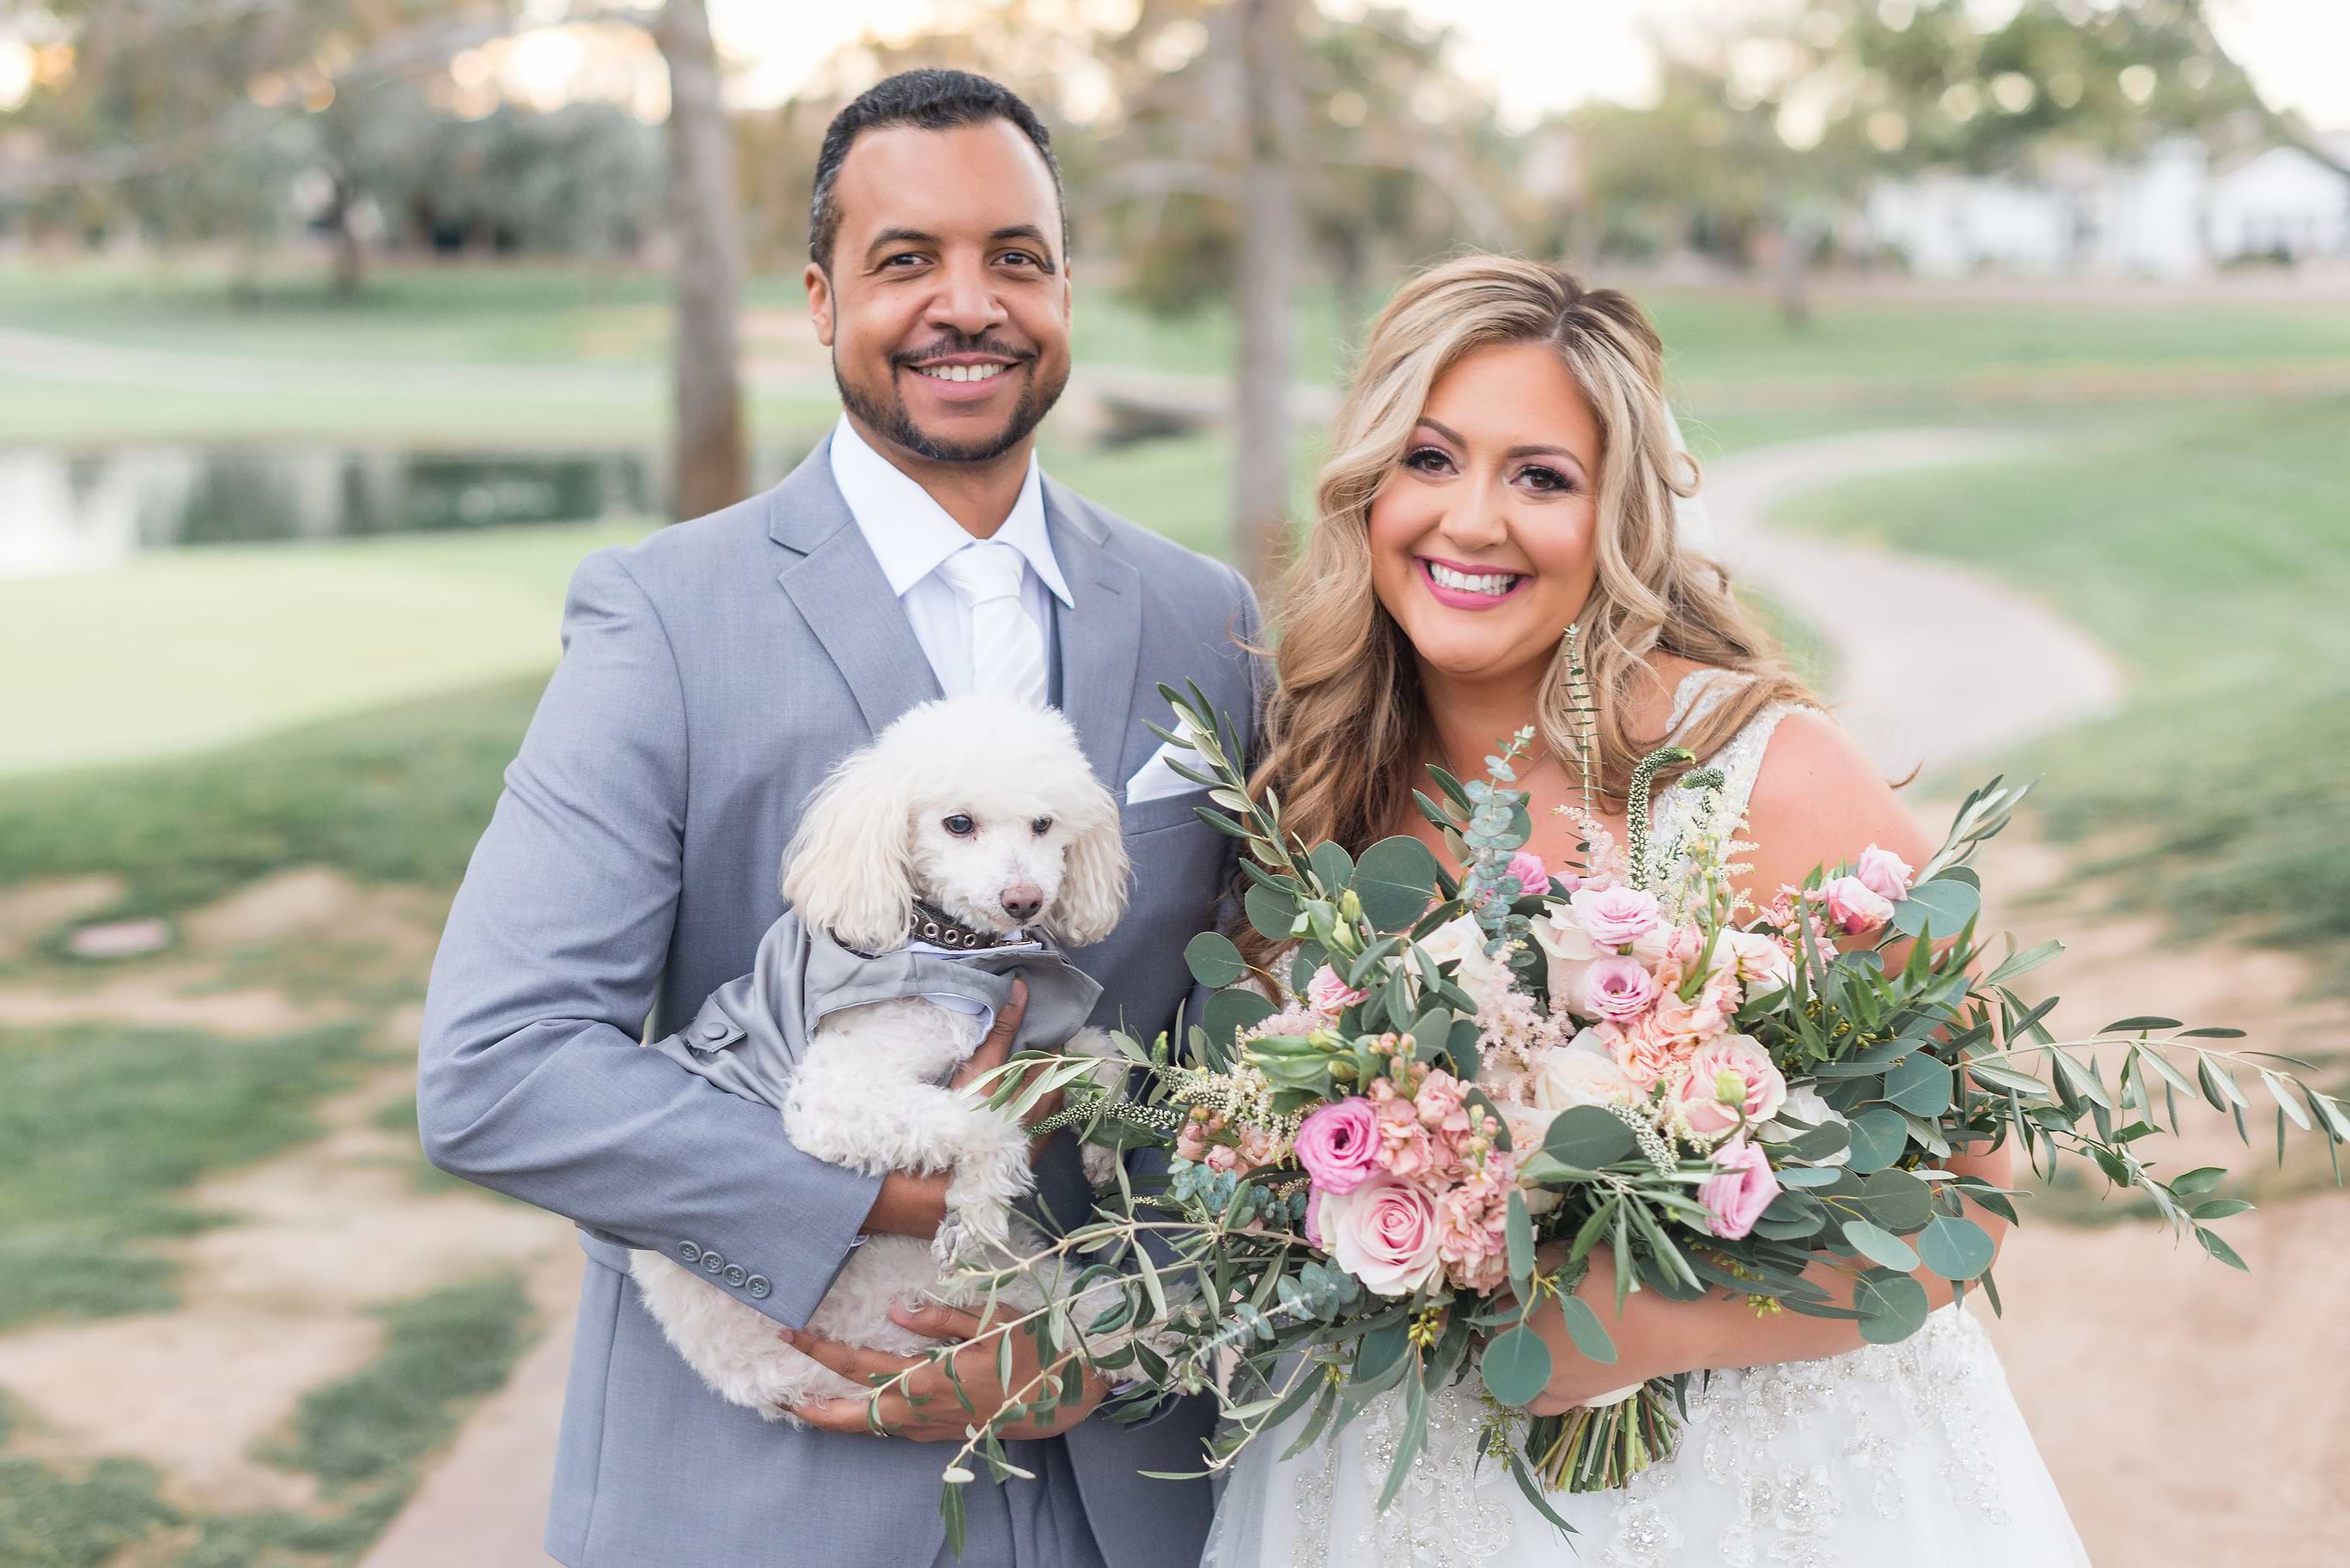 Ocotillo-CoupleWithDog-Ryan&DenisePhotography-Michelle&Russell-2019-WedgewoodWeddings